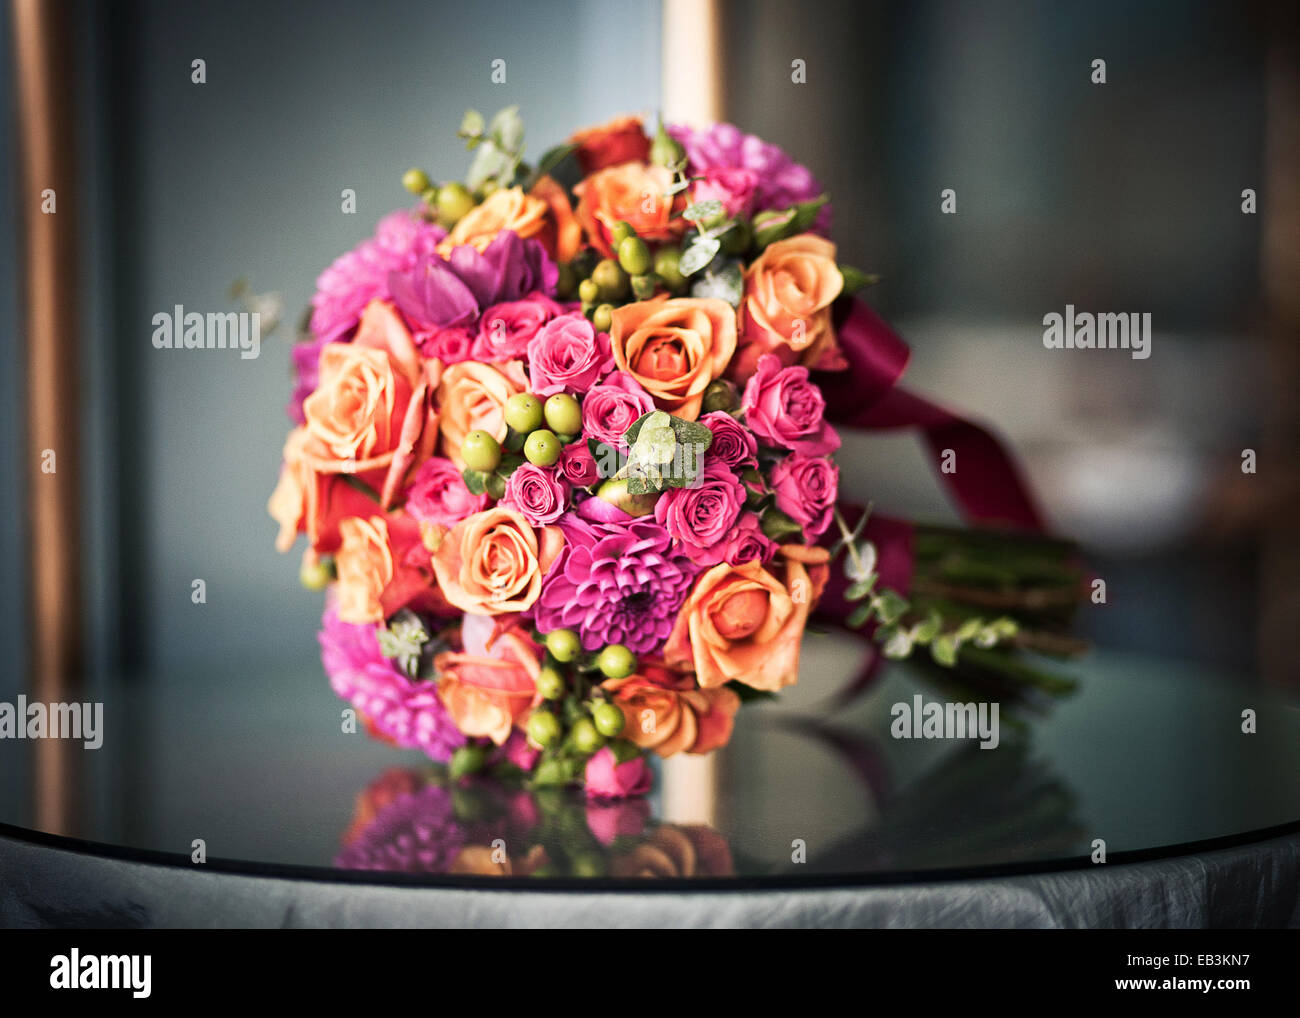 Bridal bouquet with pink and orange roses and flowers Stock Photo